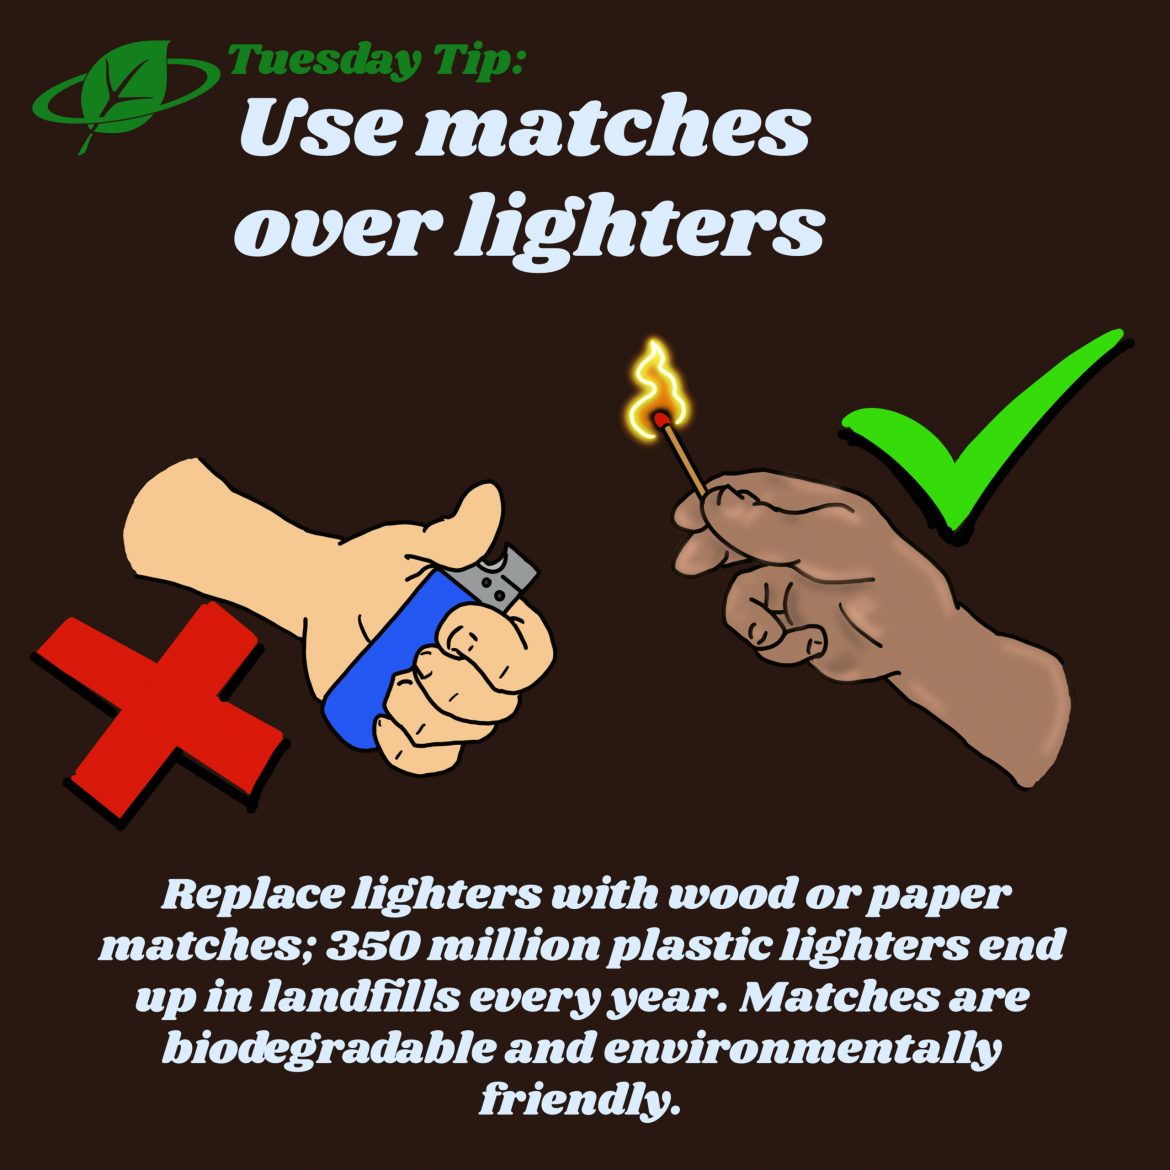 Use matches over lighters | Tuesday Tip